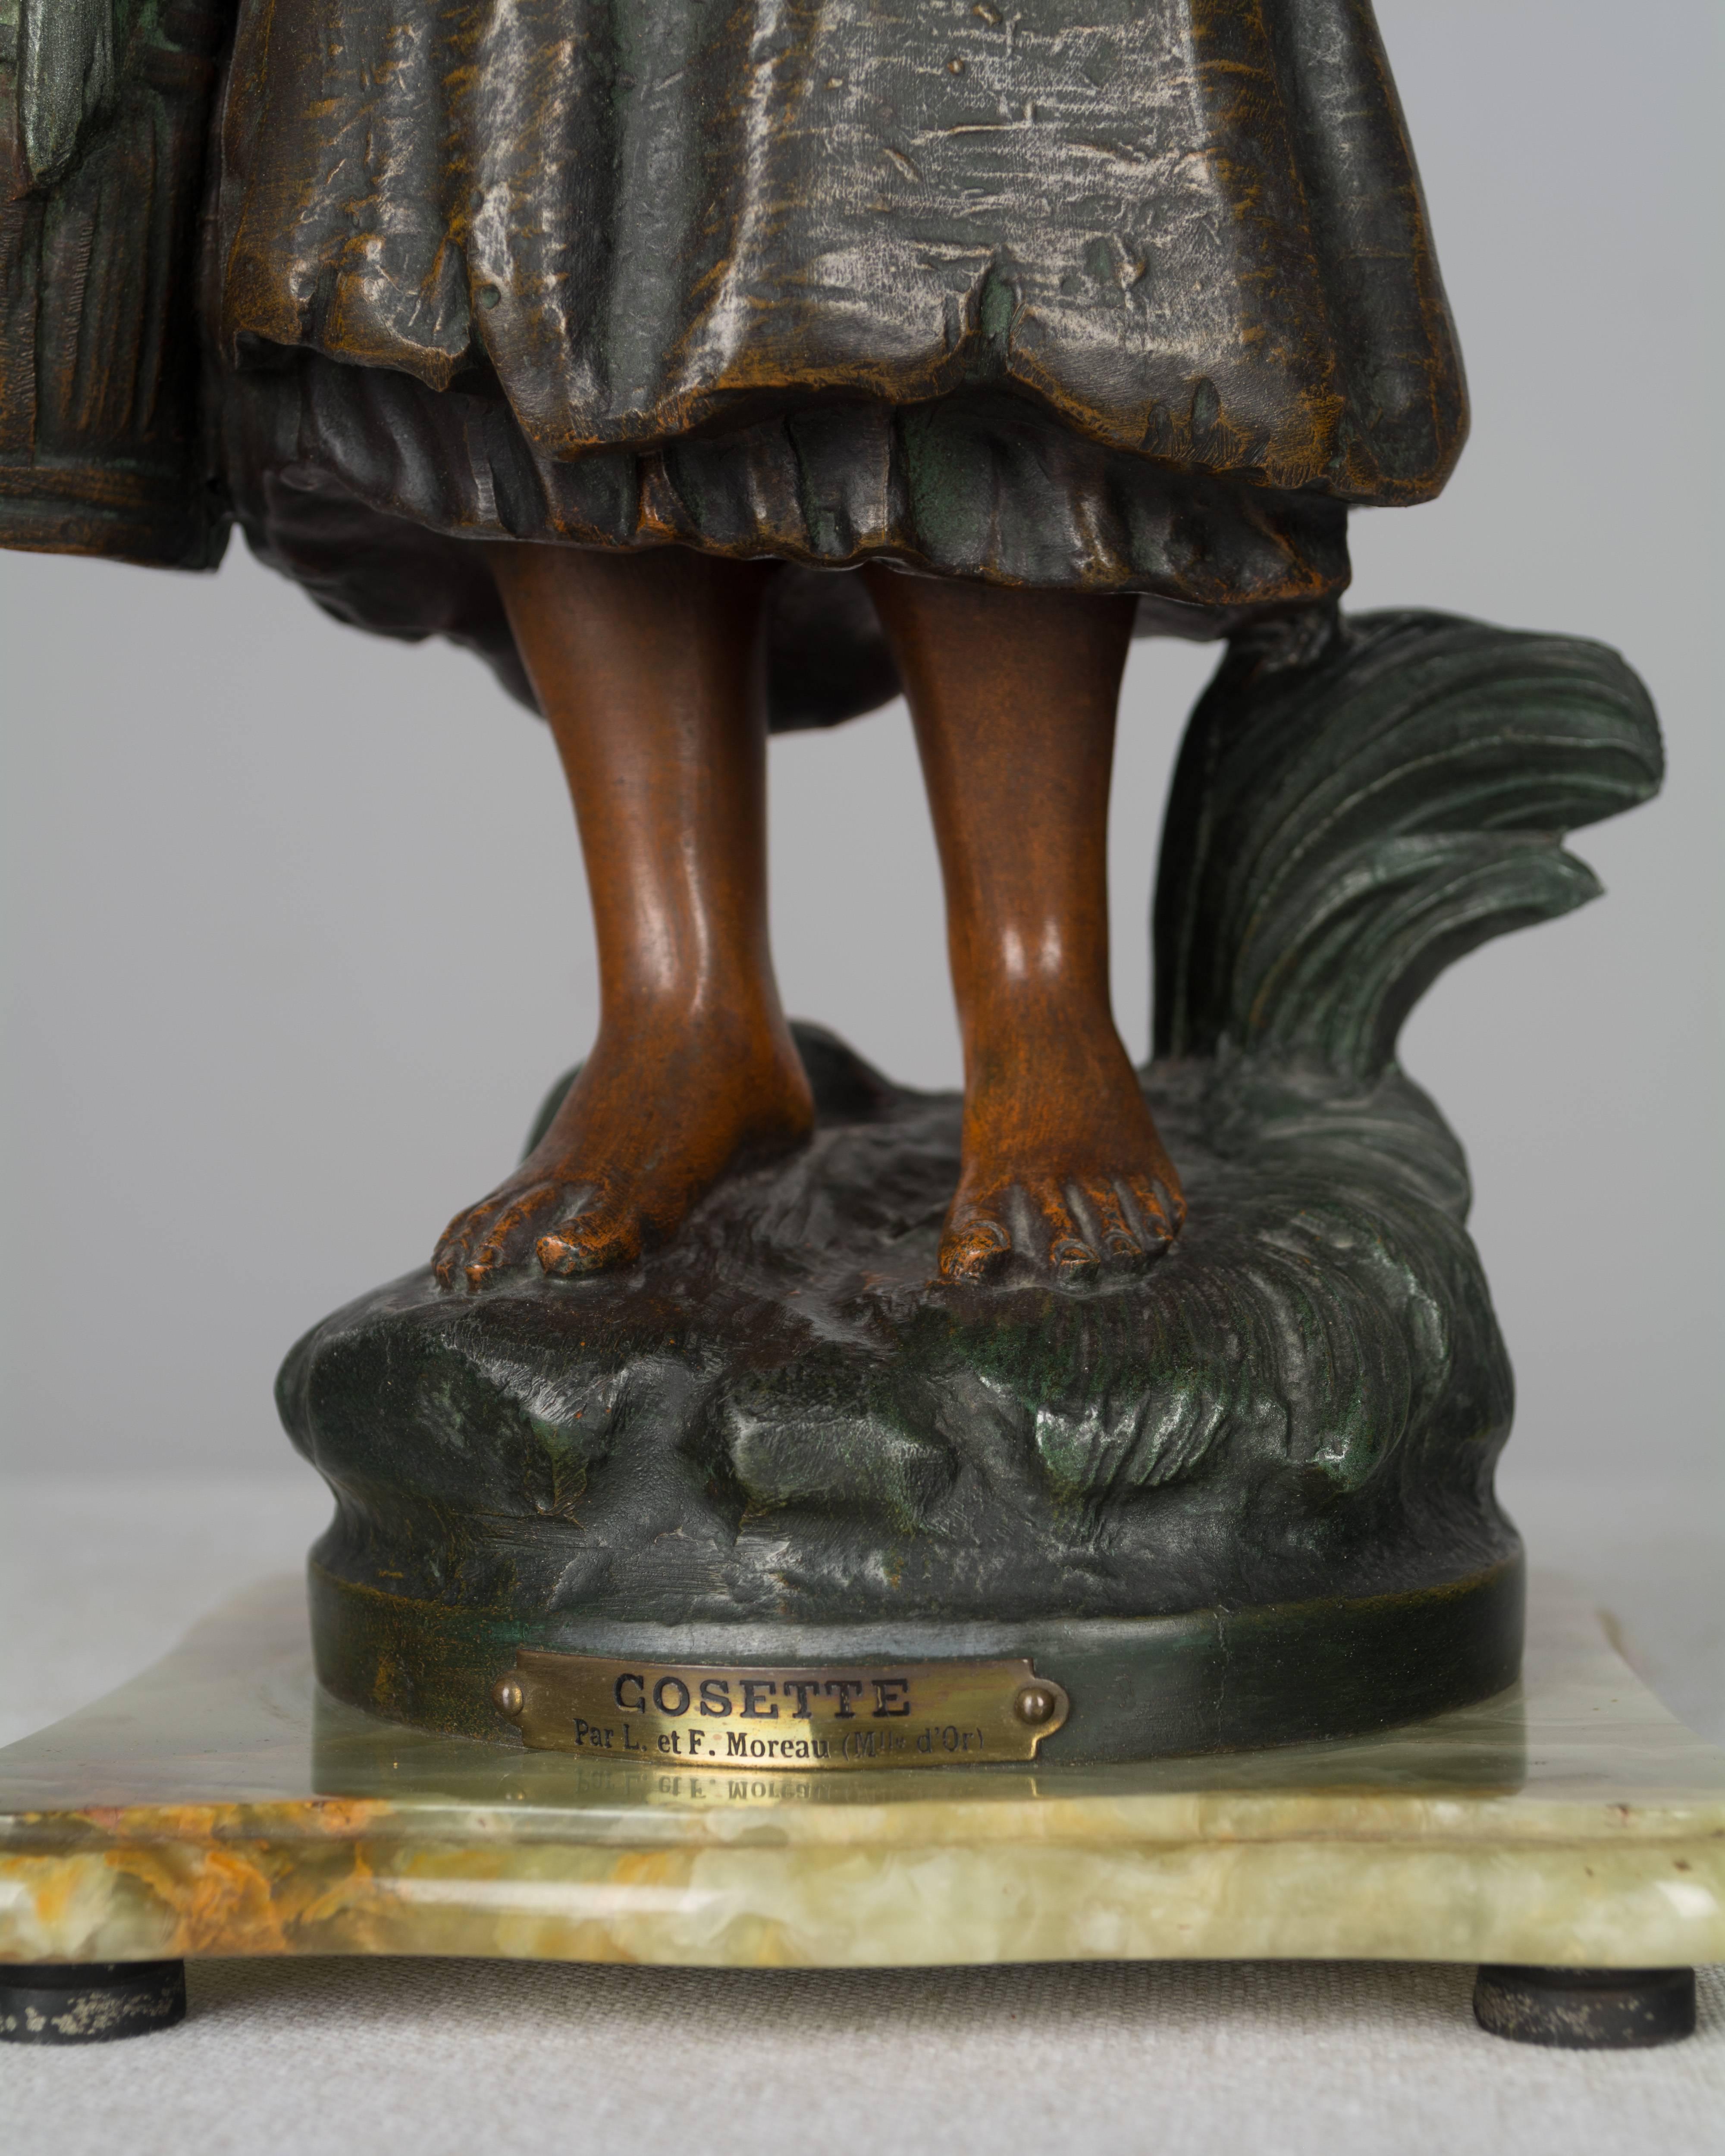 19th Century French Sculpture of Cosette 4